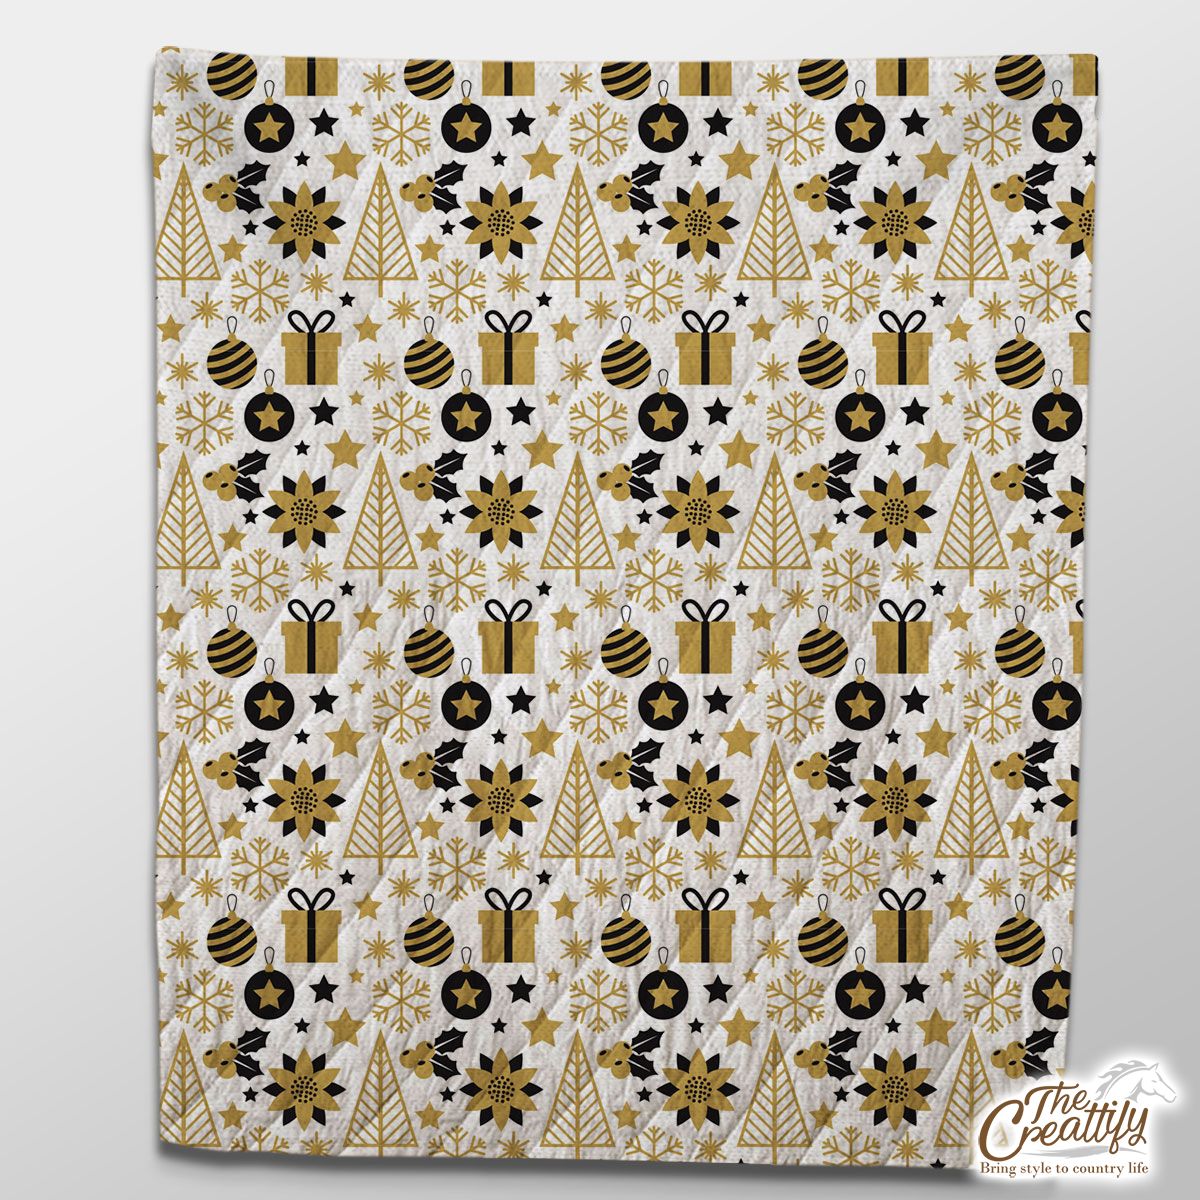 Black And Gold Christmas Gift, Holly Leaf, Snowflake On White Background Quilt